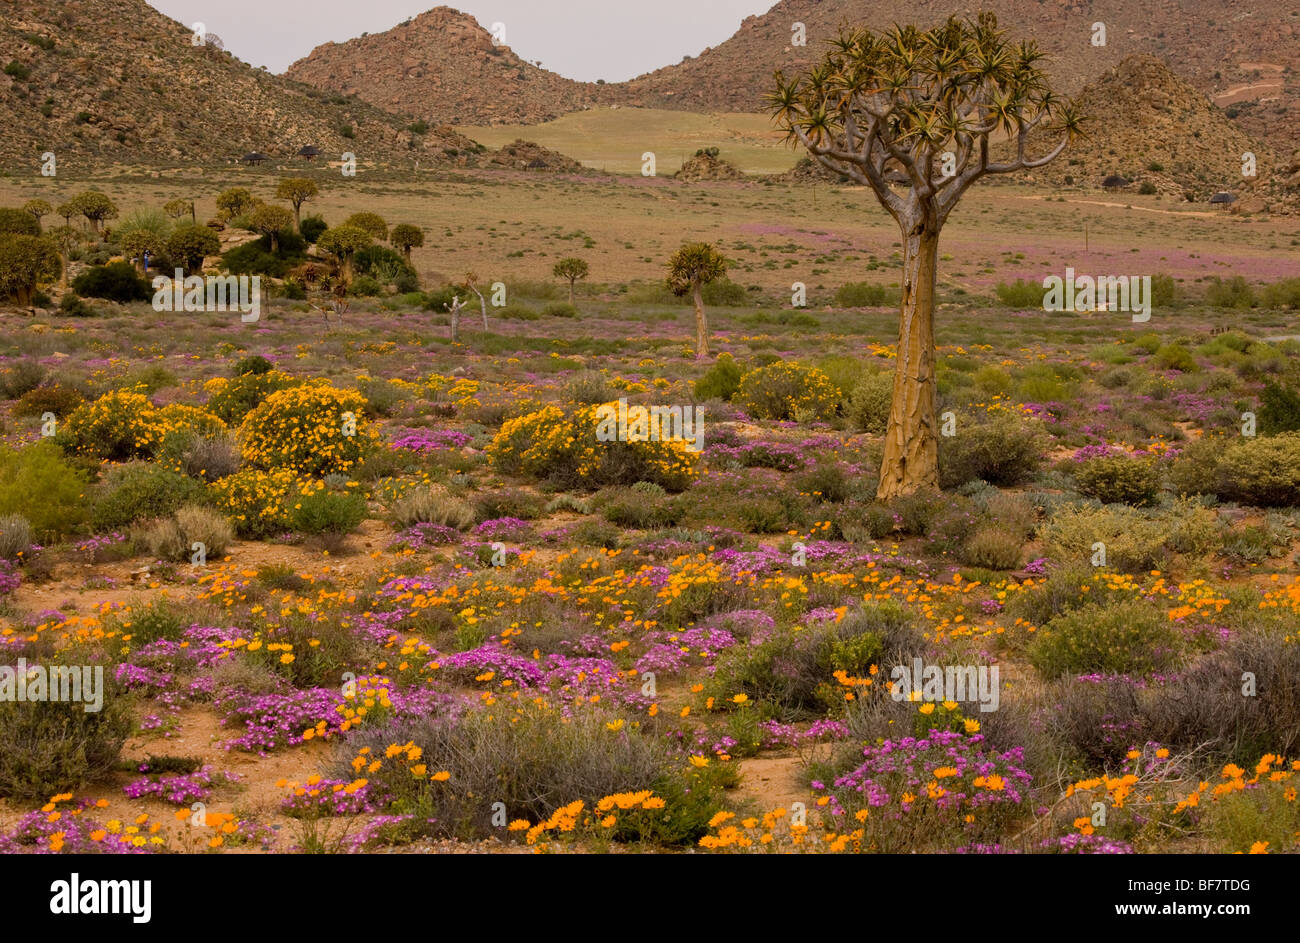 desert in flower in Namaqualand: Quiver tree Aloe dichotoma, orange daisies Tripteris hyoseroides and pink mesembs Drosanthemum Stock Photo